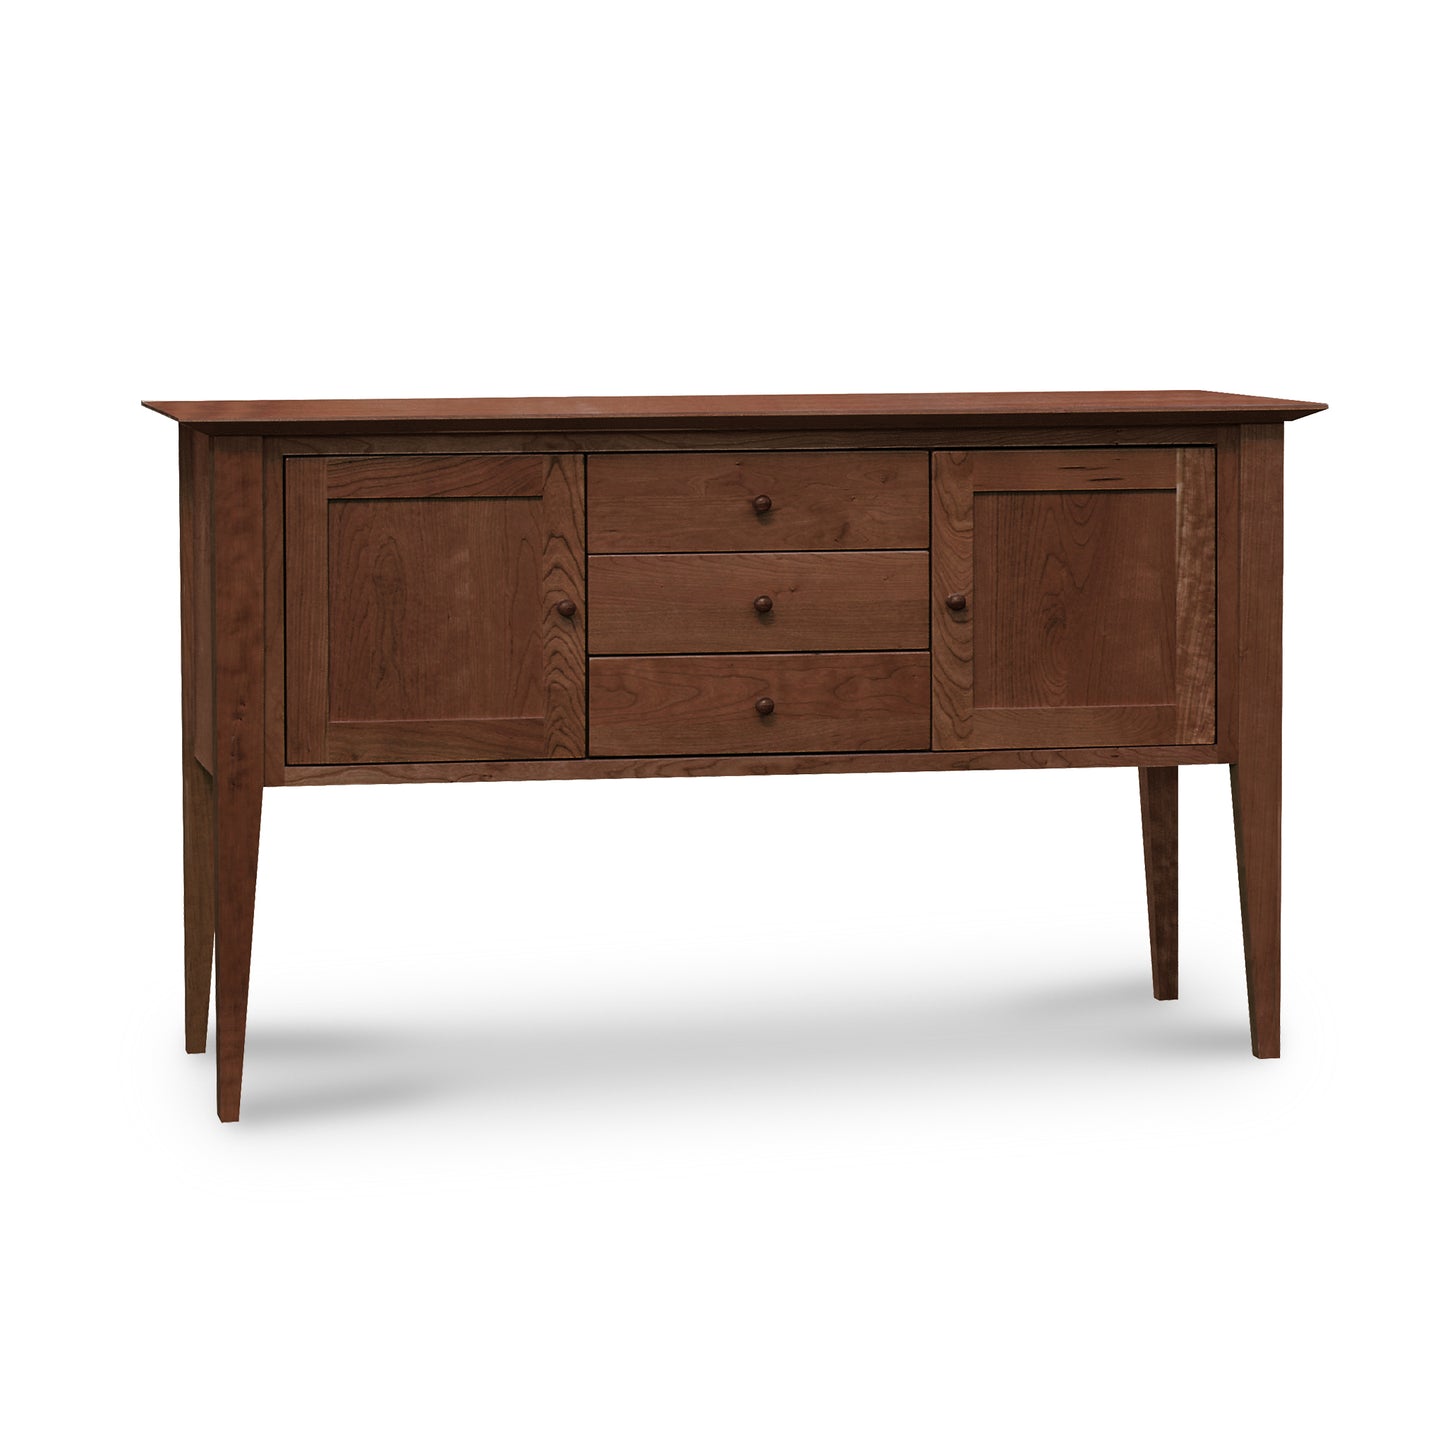 A Classic Shaker Small Buffet with two drawers and two doors, featuring a Shaker-style design and solid wood construction, handcrafted by Lyndon Furniture.